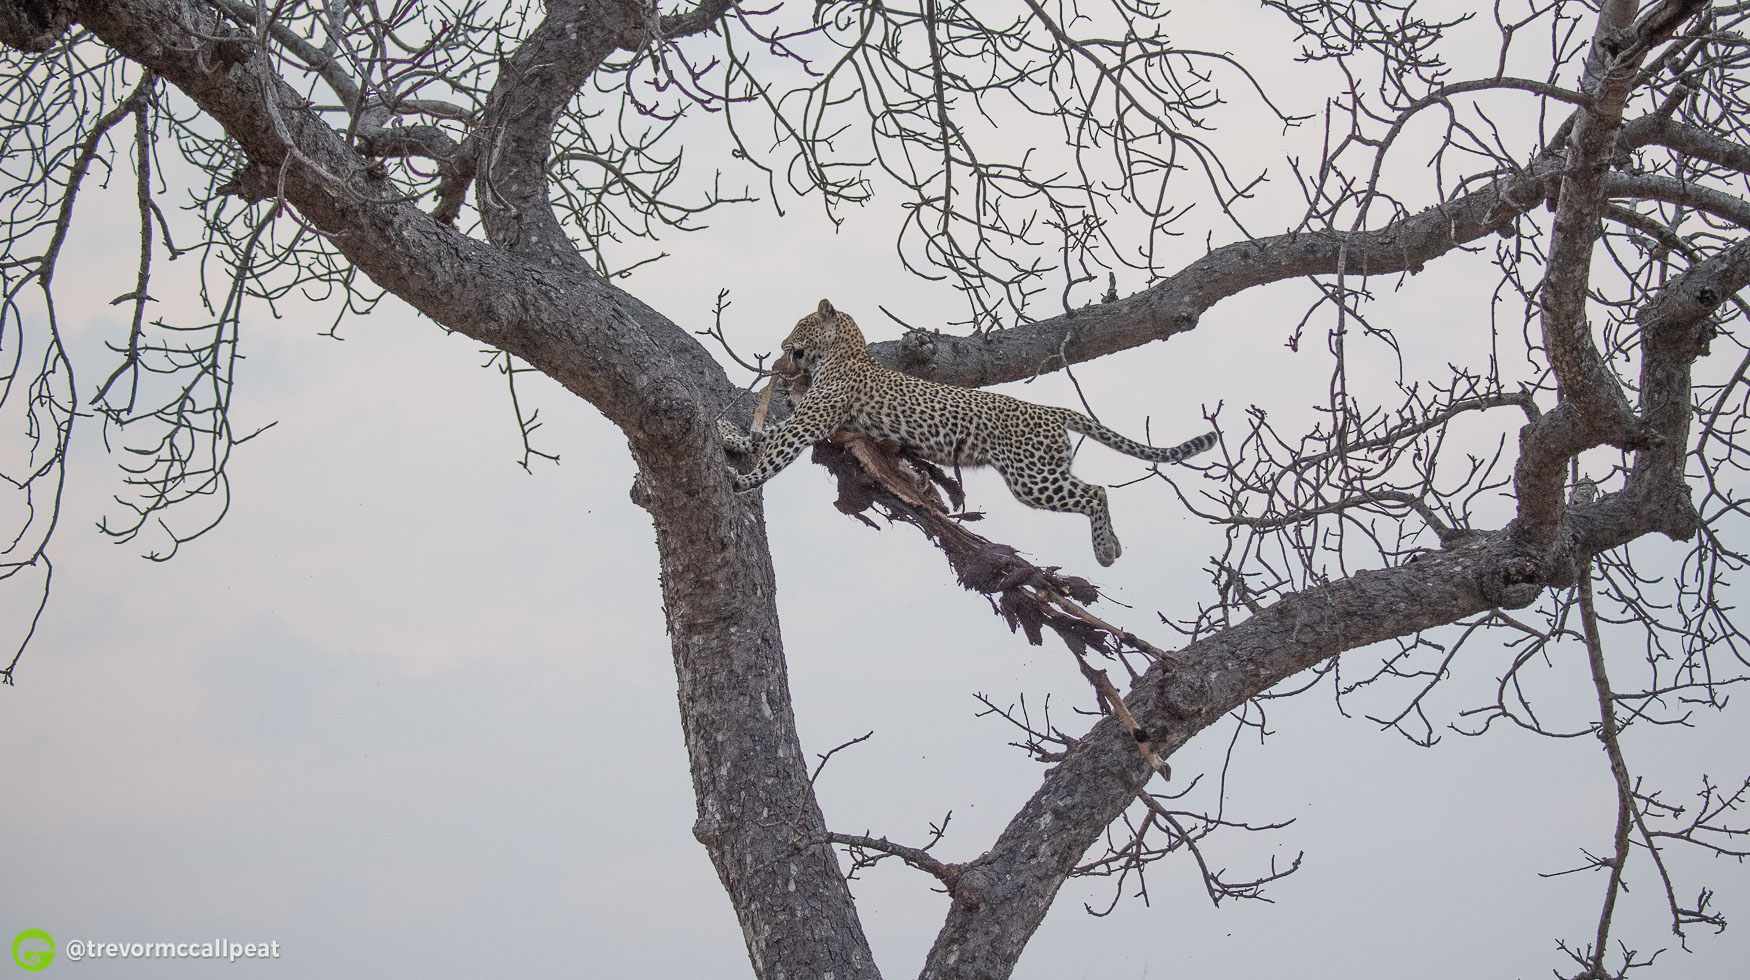 An Action Packed Safari To the Timbavati